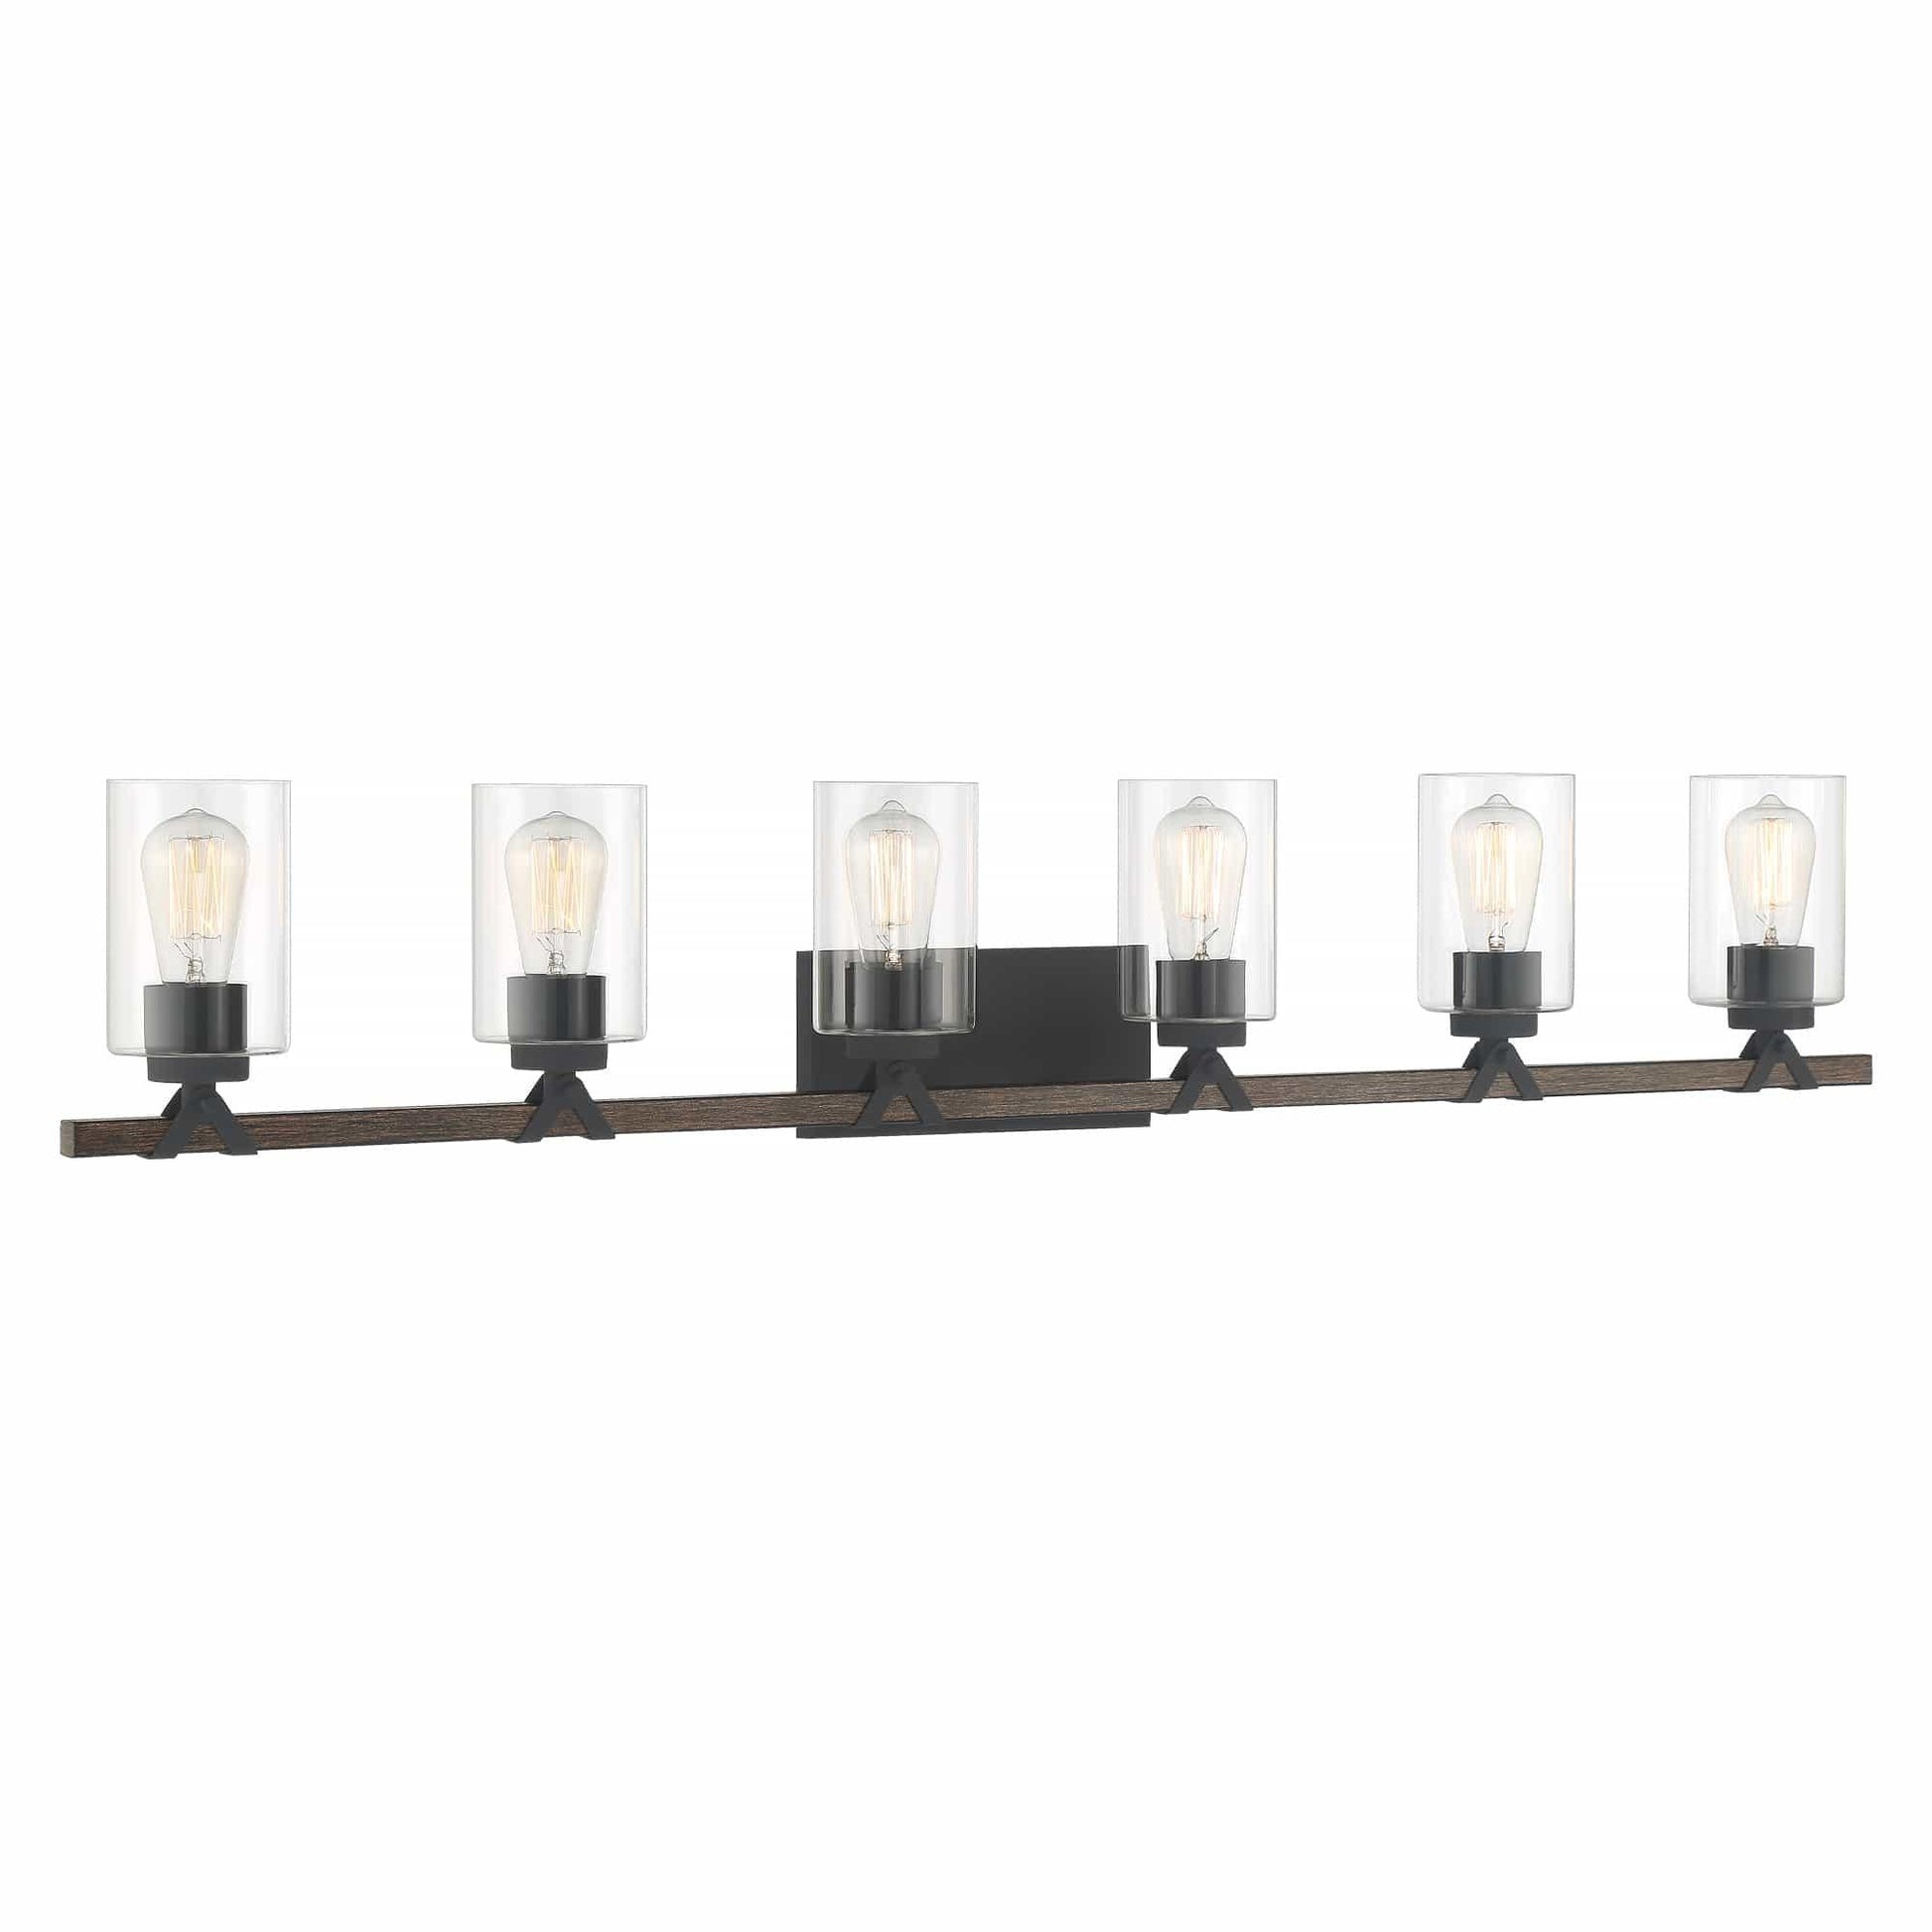 7806 | 6 - Light Dimmable Vanity Light by ACROMA™  UL - ACROMA